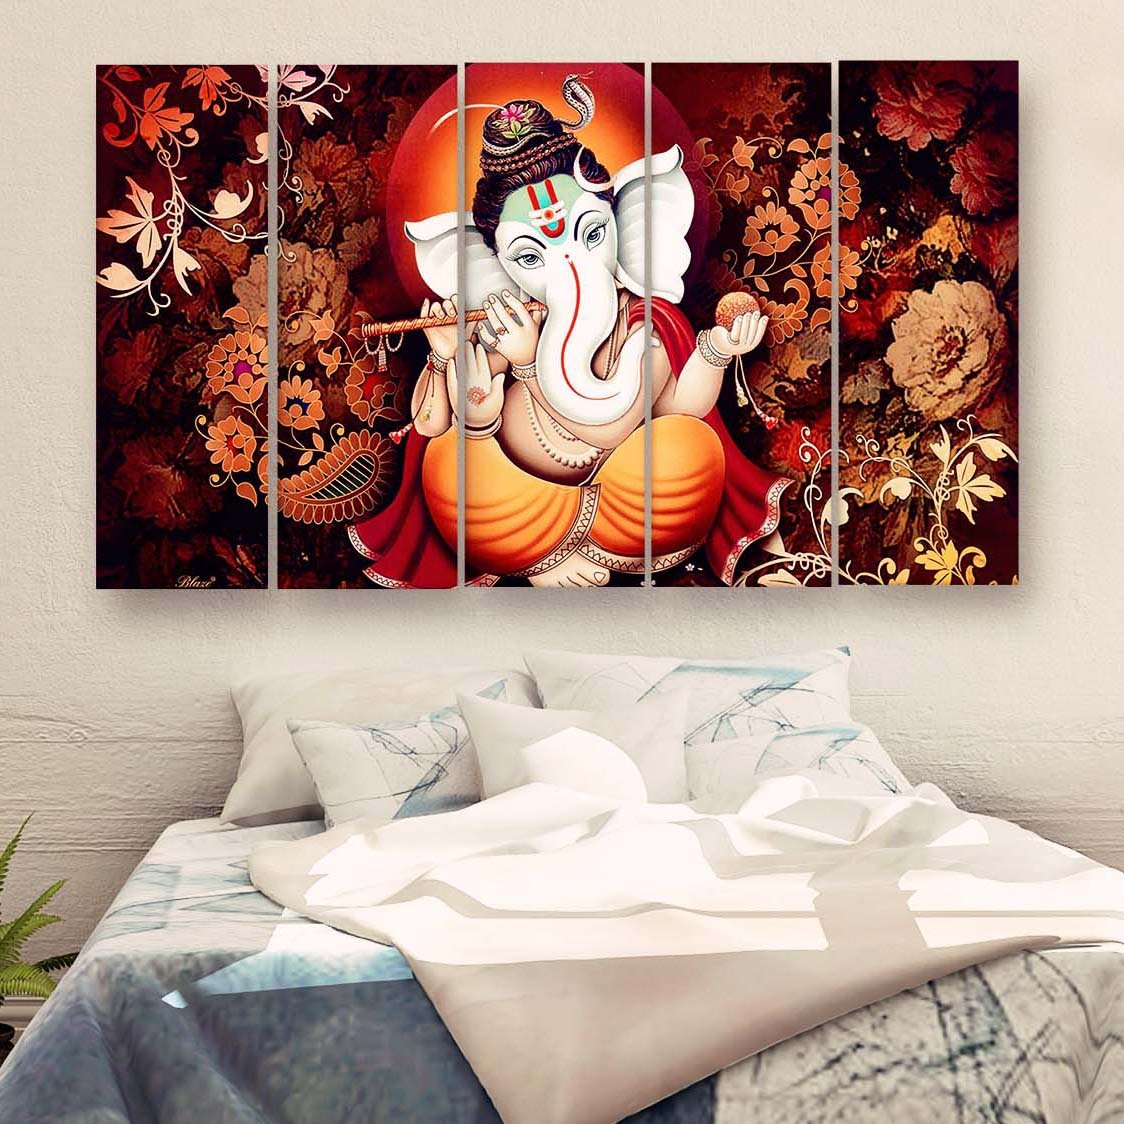 Casperme Lord Ganesh Wall Painting For Living Room for Bedroom, Hotels & Office Decoration (48×30 inhes)